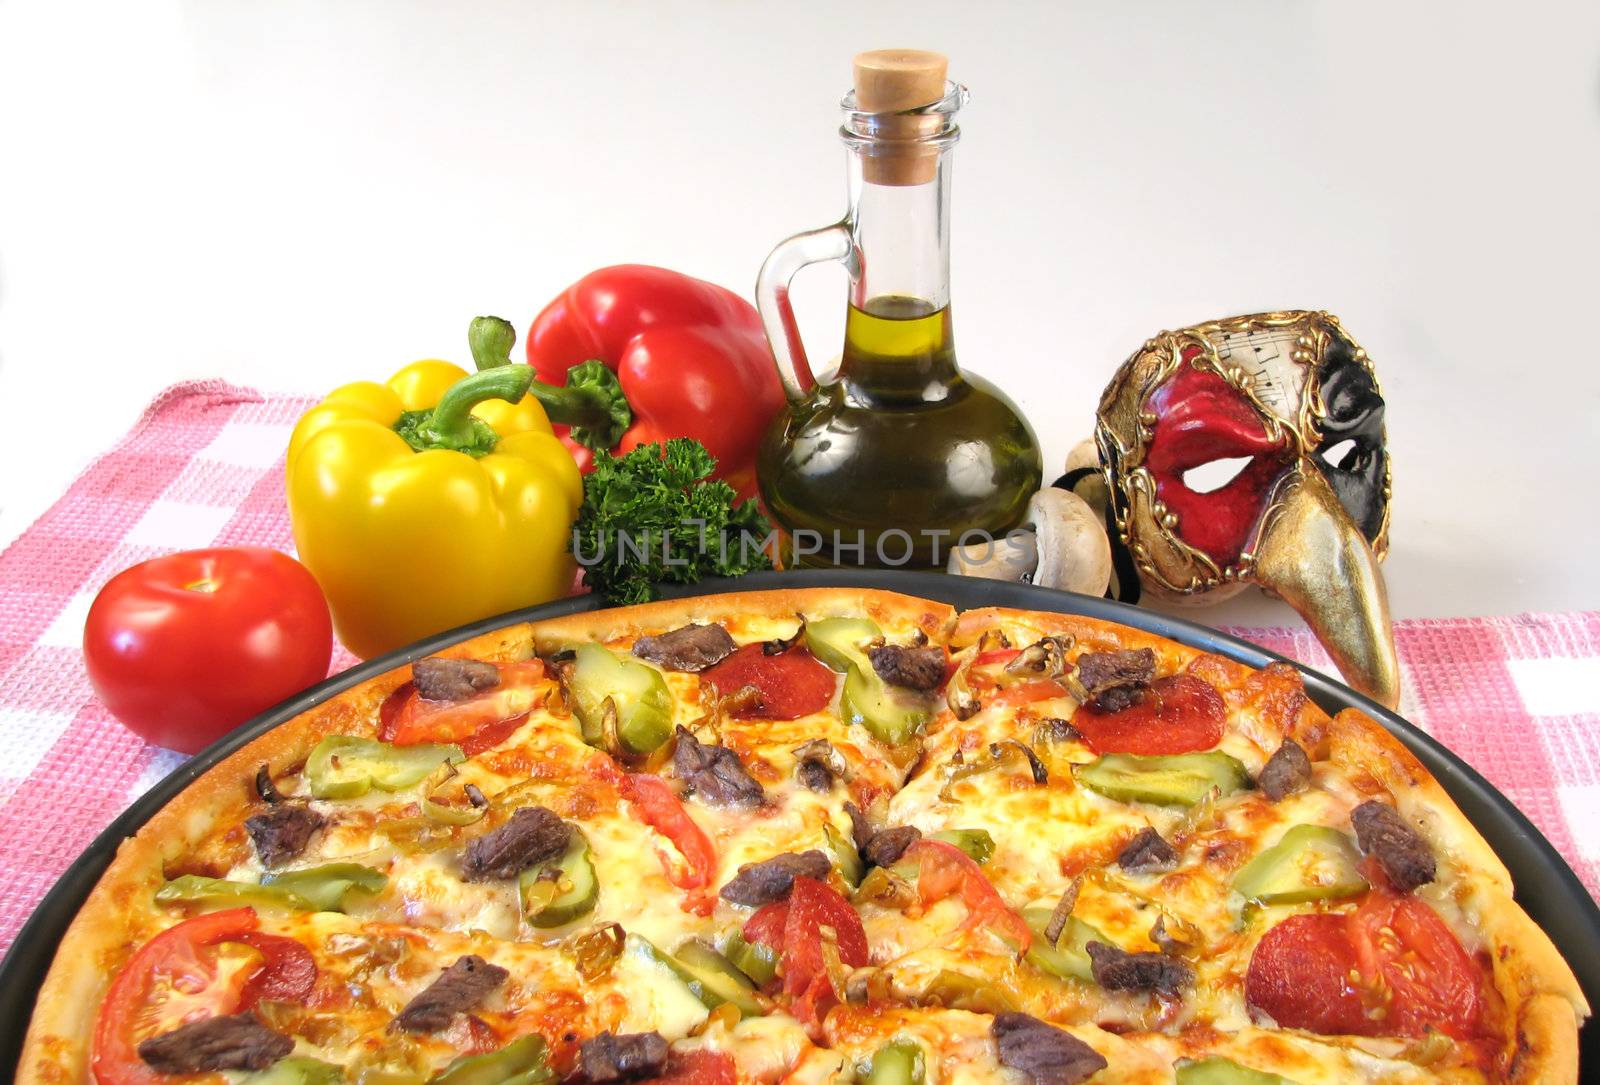 Composition from a pizza, vegetables and the Italian mask. �lose up